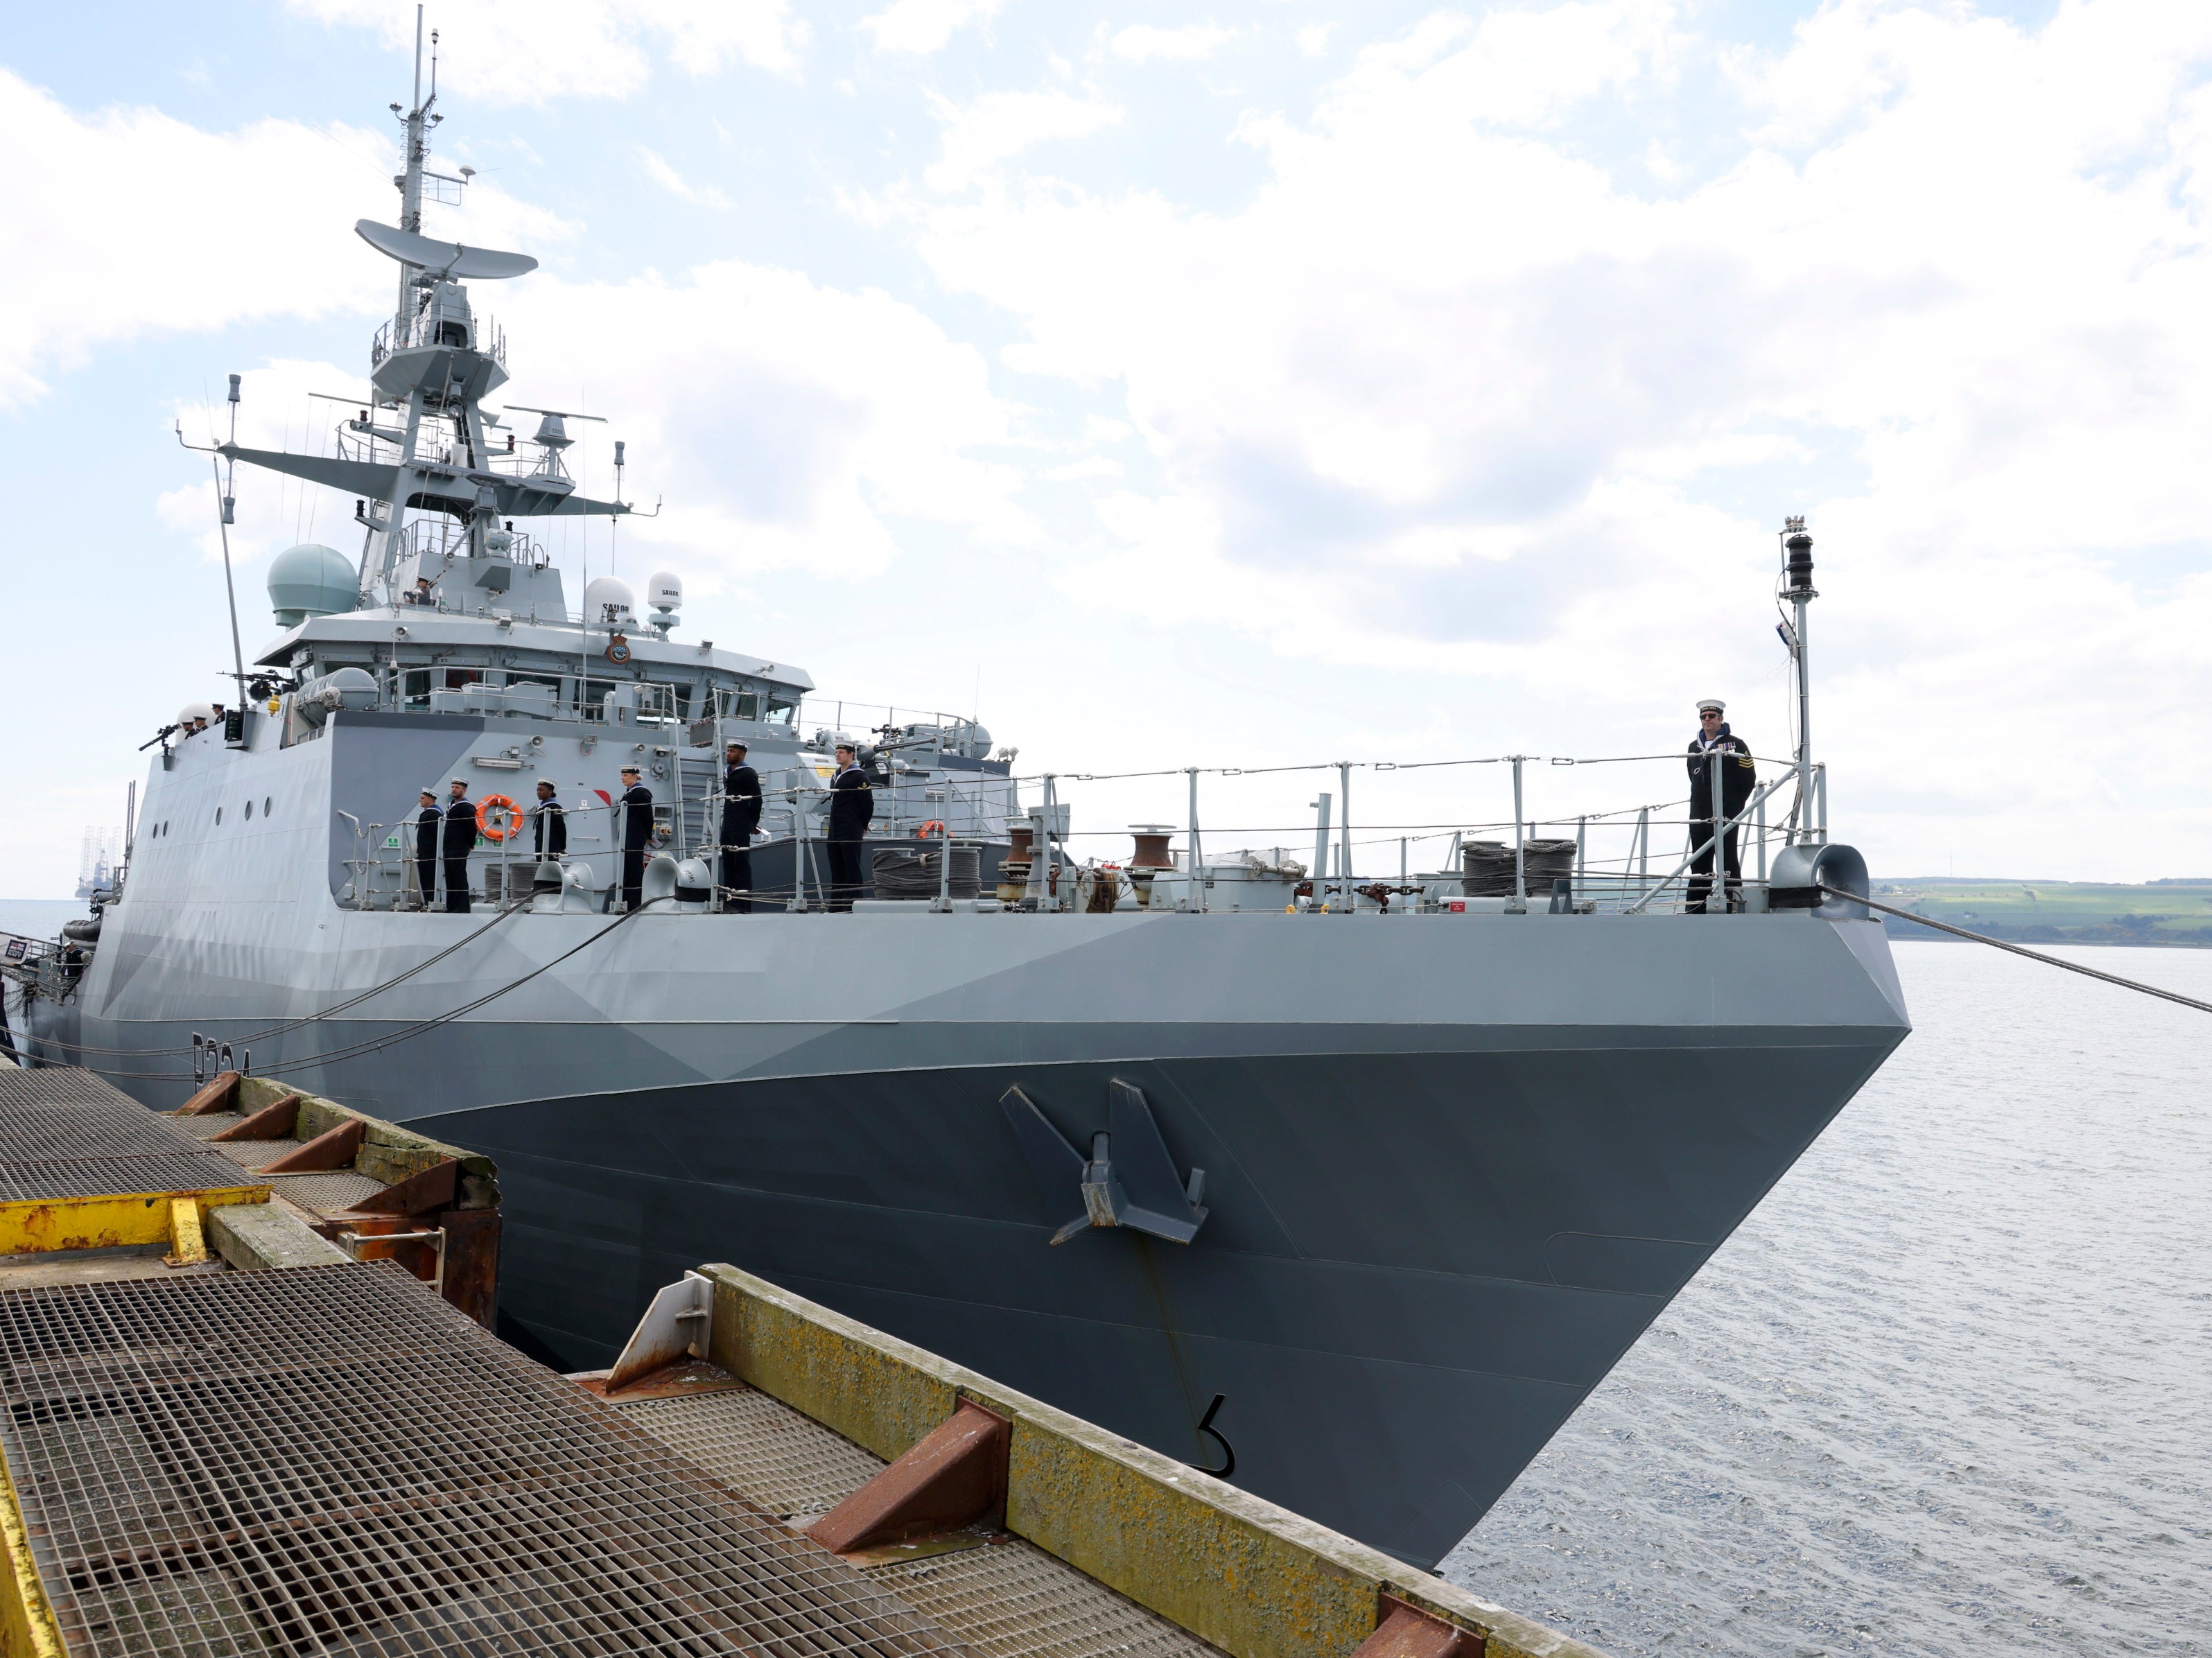 The HMS Spey is one of the ships to be deployed to the region later this year